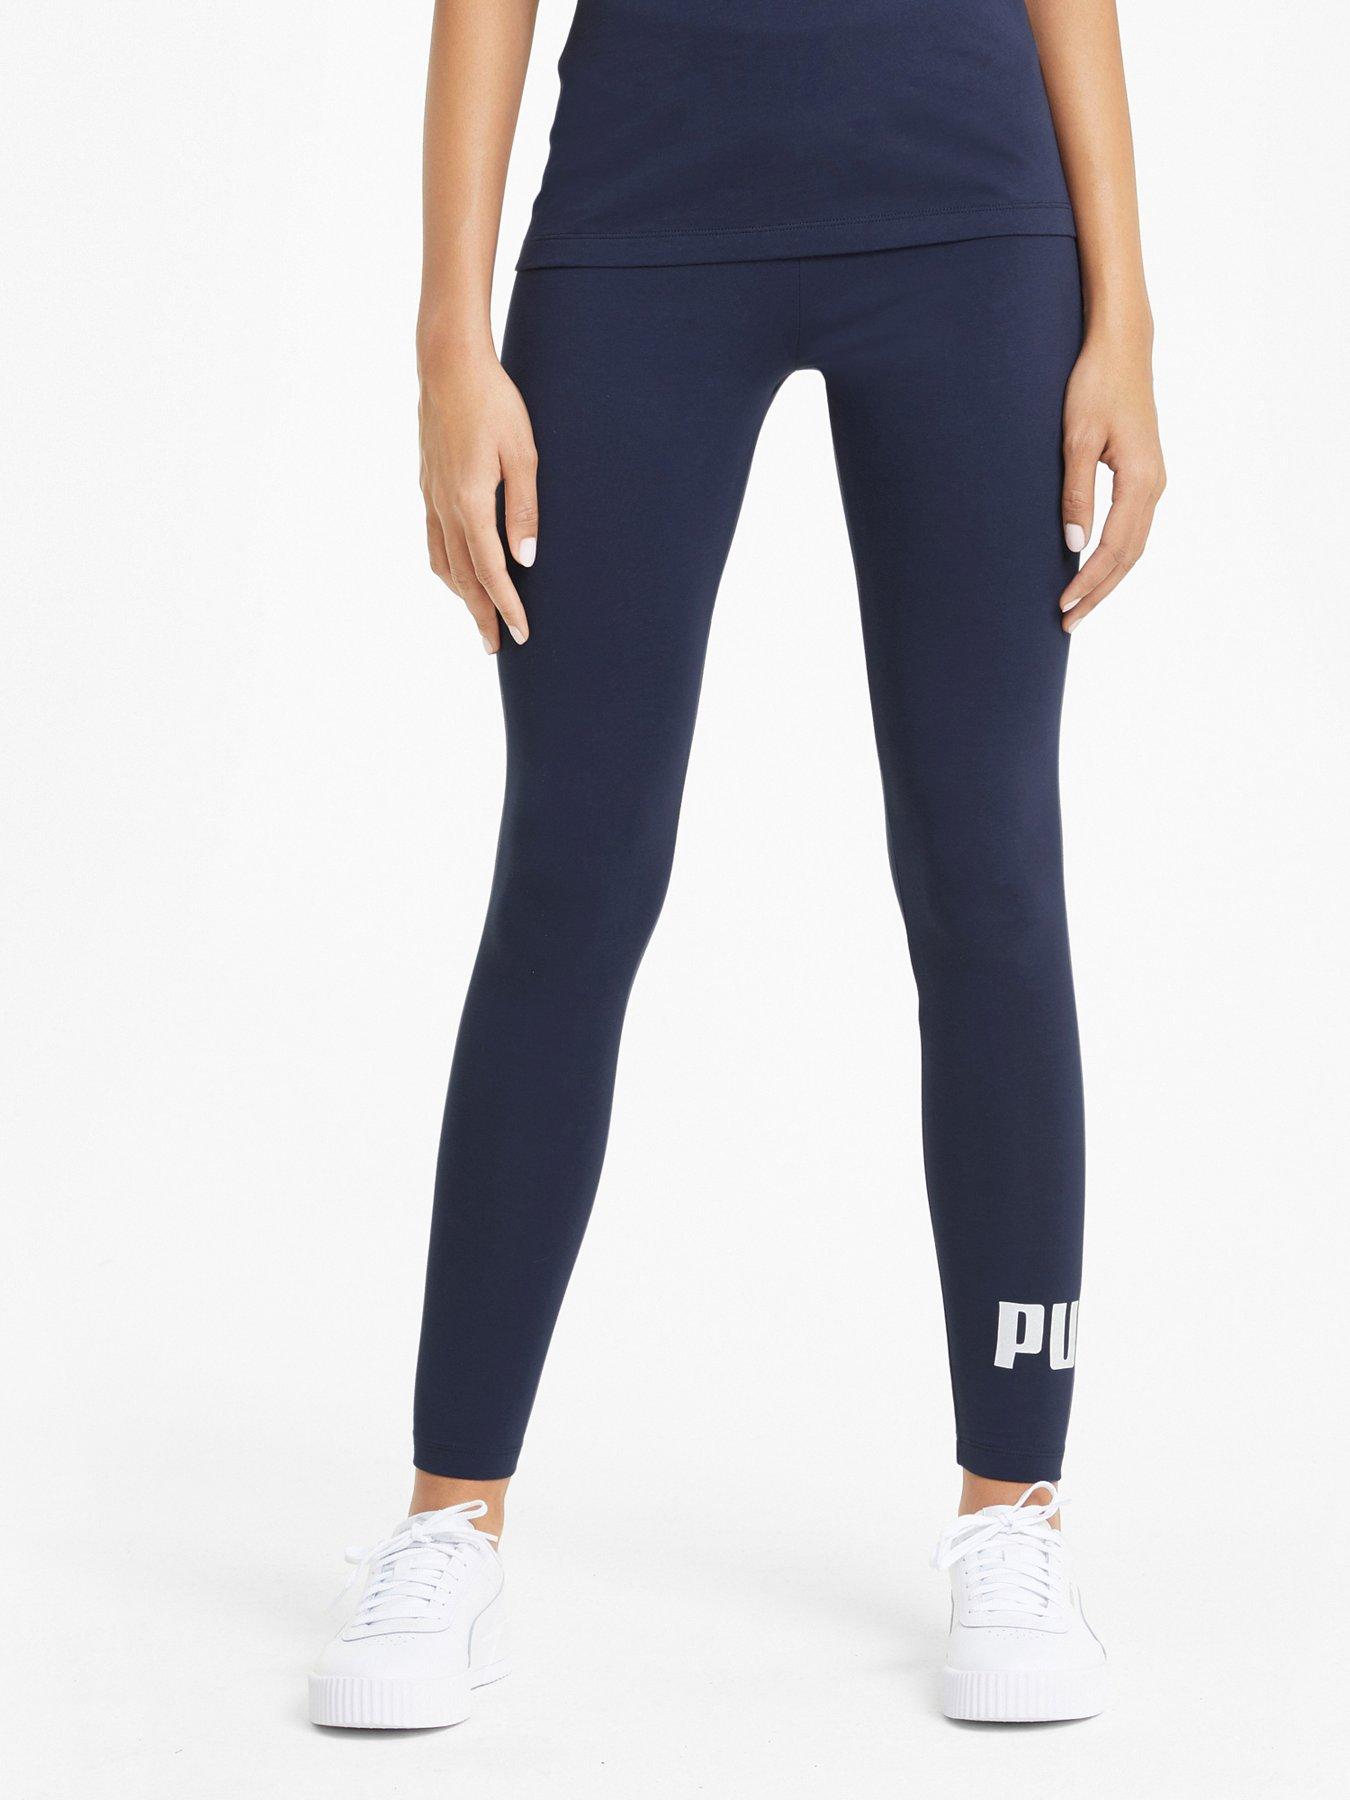 PUMA Winterized All Over Print Tights in Black Slacks and Chinos Leggings Womens Clothing Trousers 